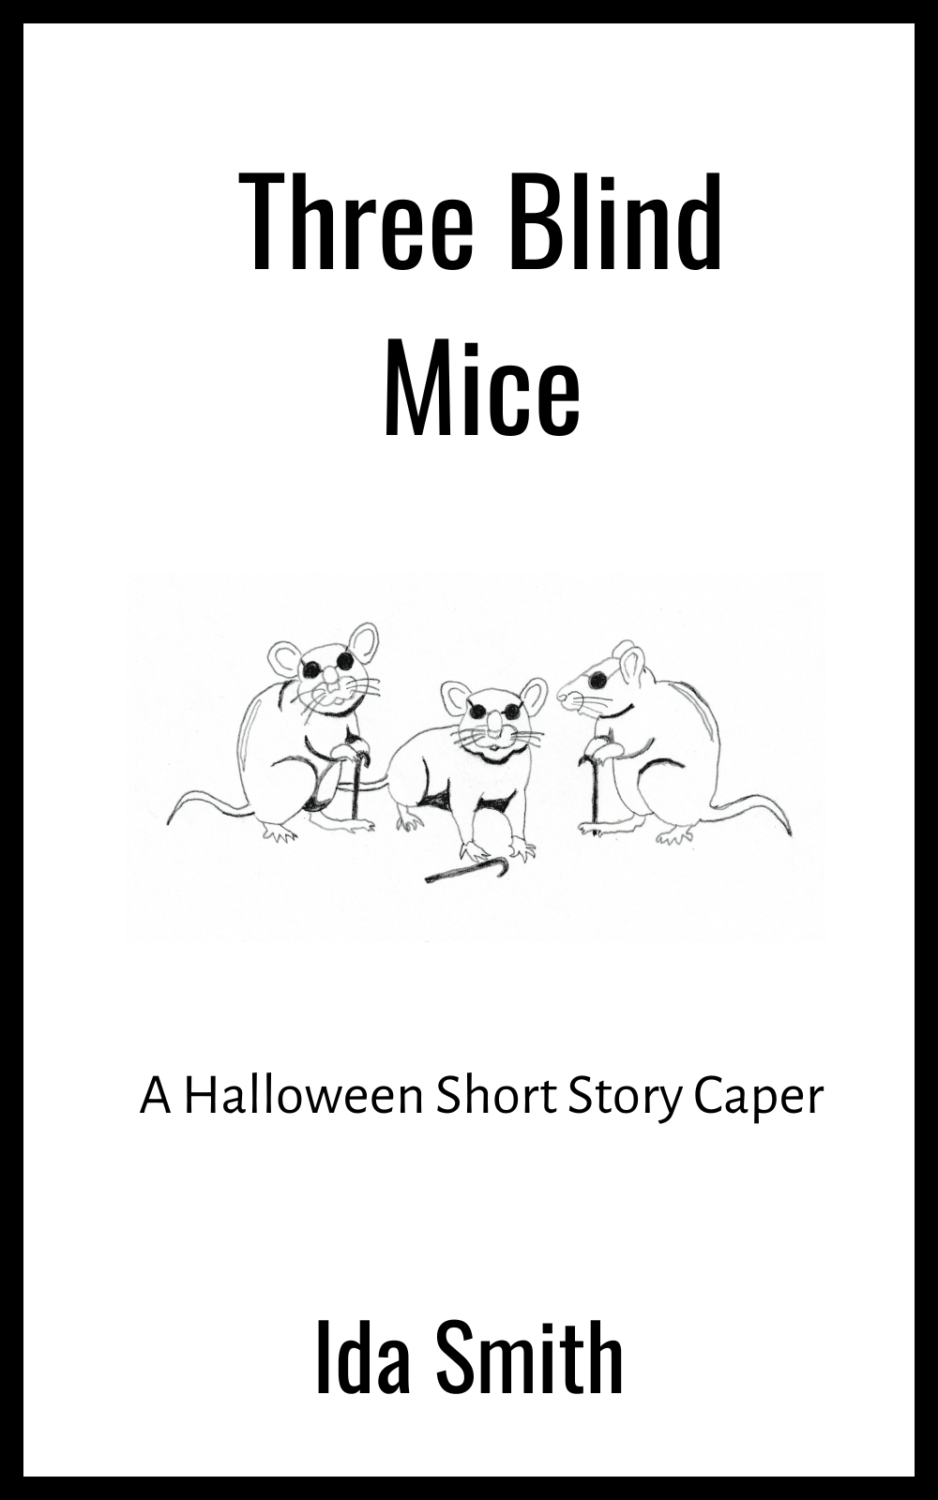 Three Blind Mice - a Halloween Short Story Caper. with a jagged journey.